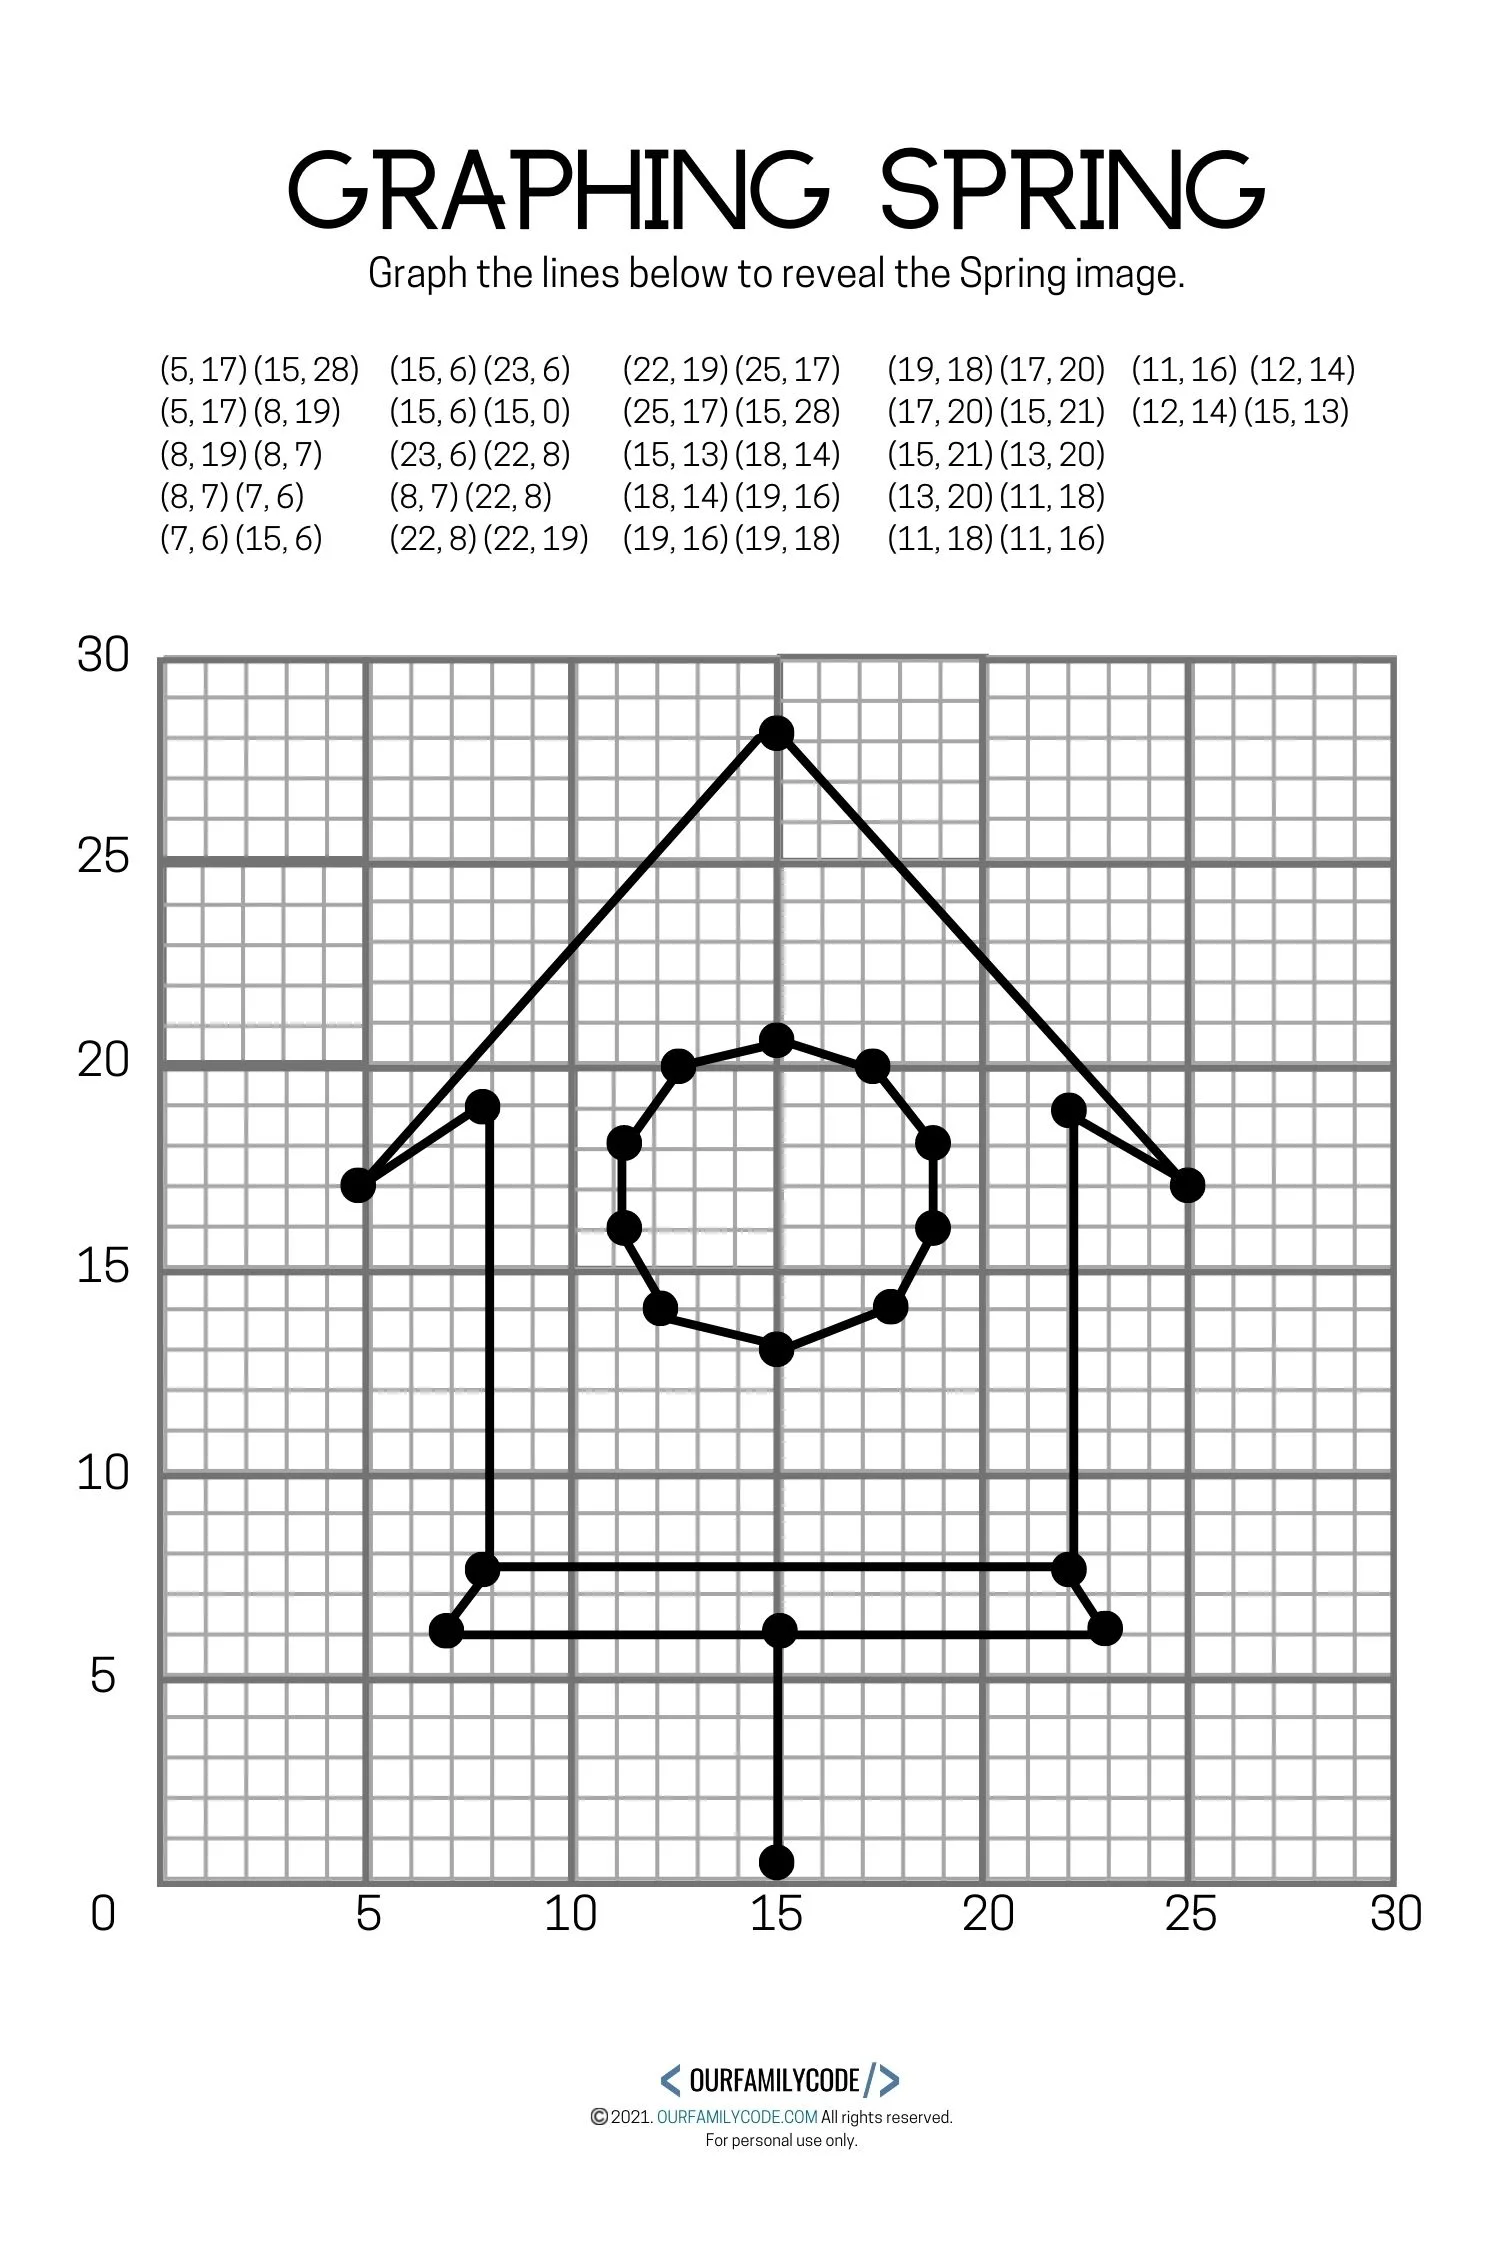 A picture of a birdhouse graphed in the first quadrant of a coordinate plane.